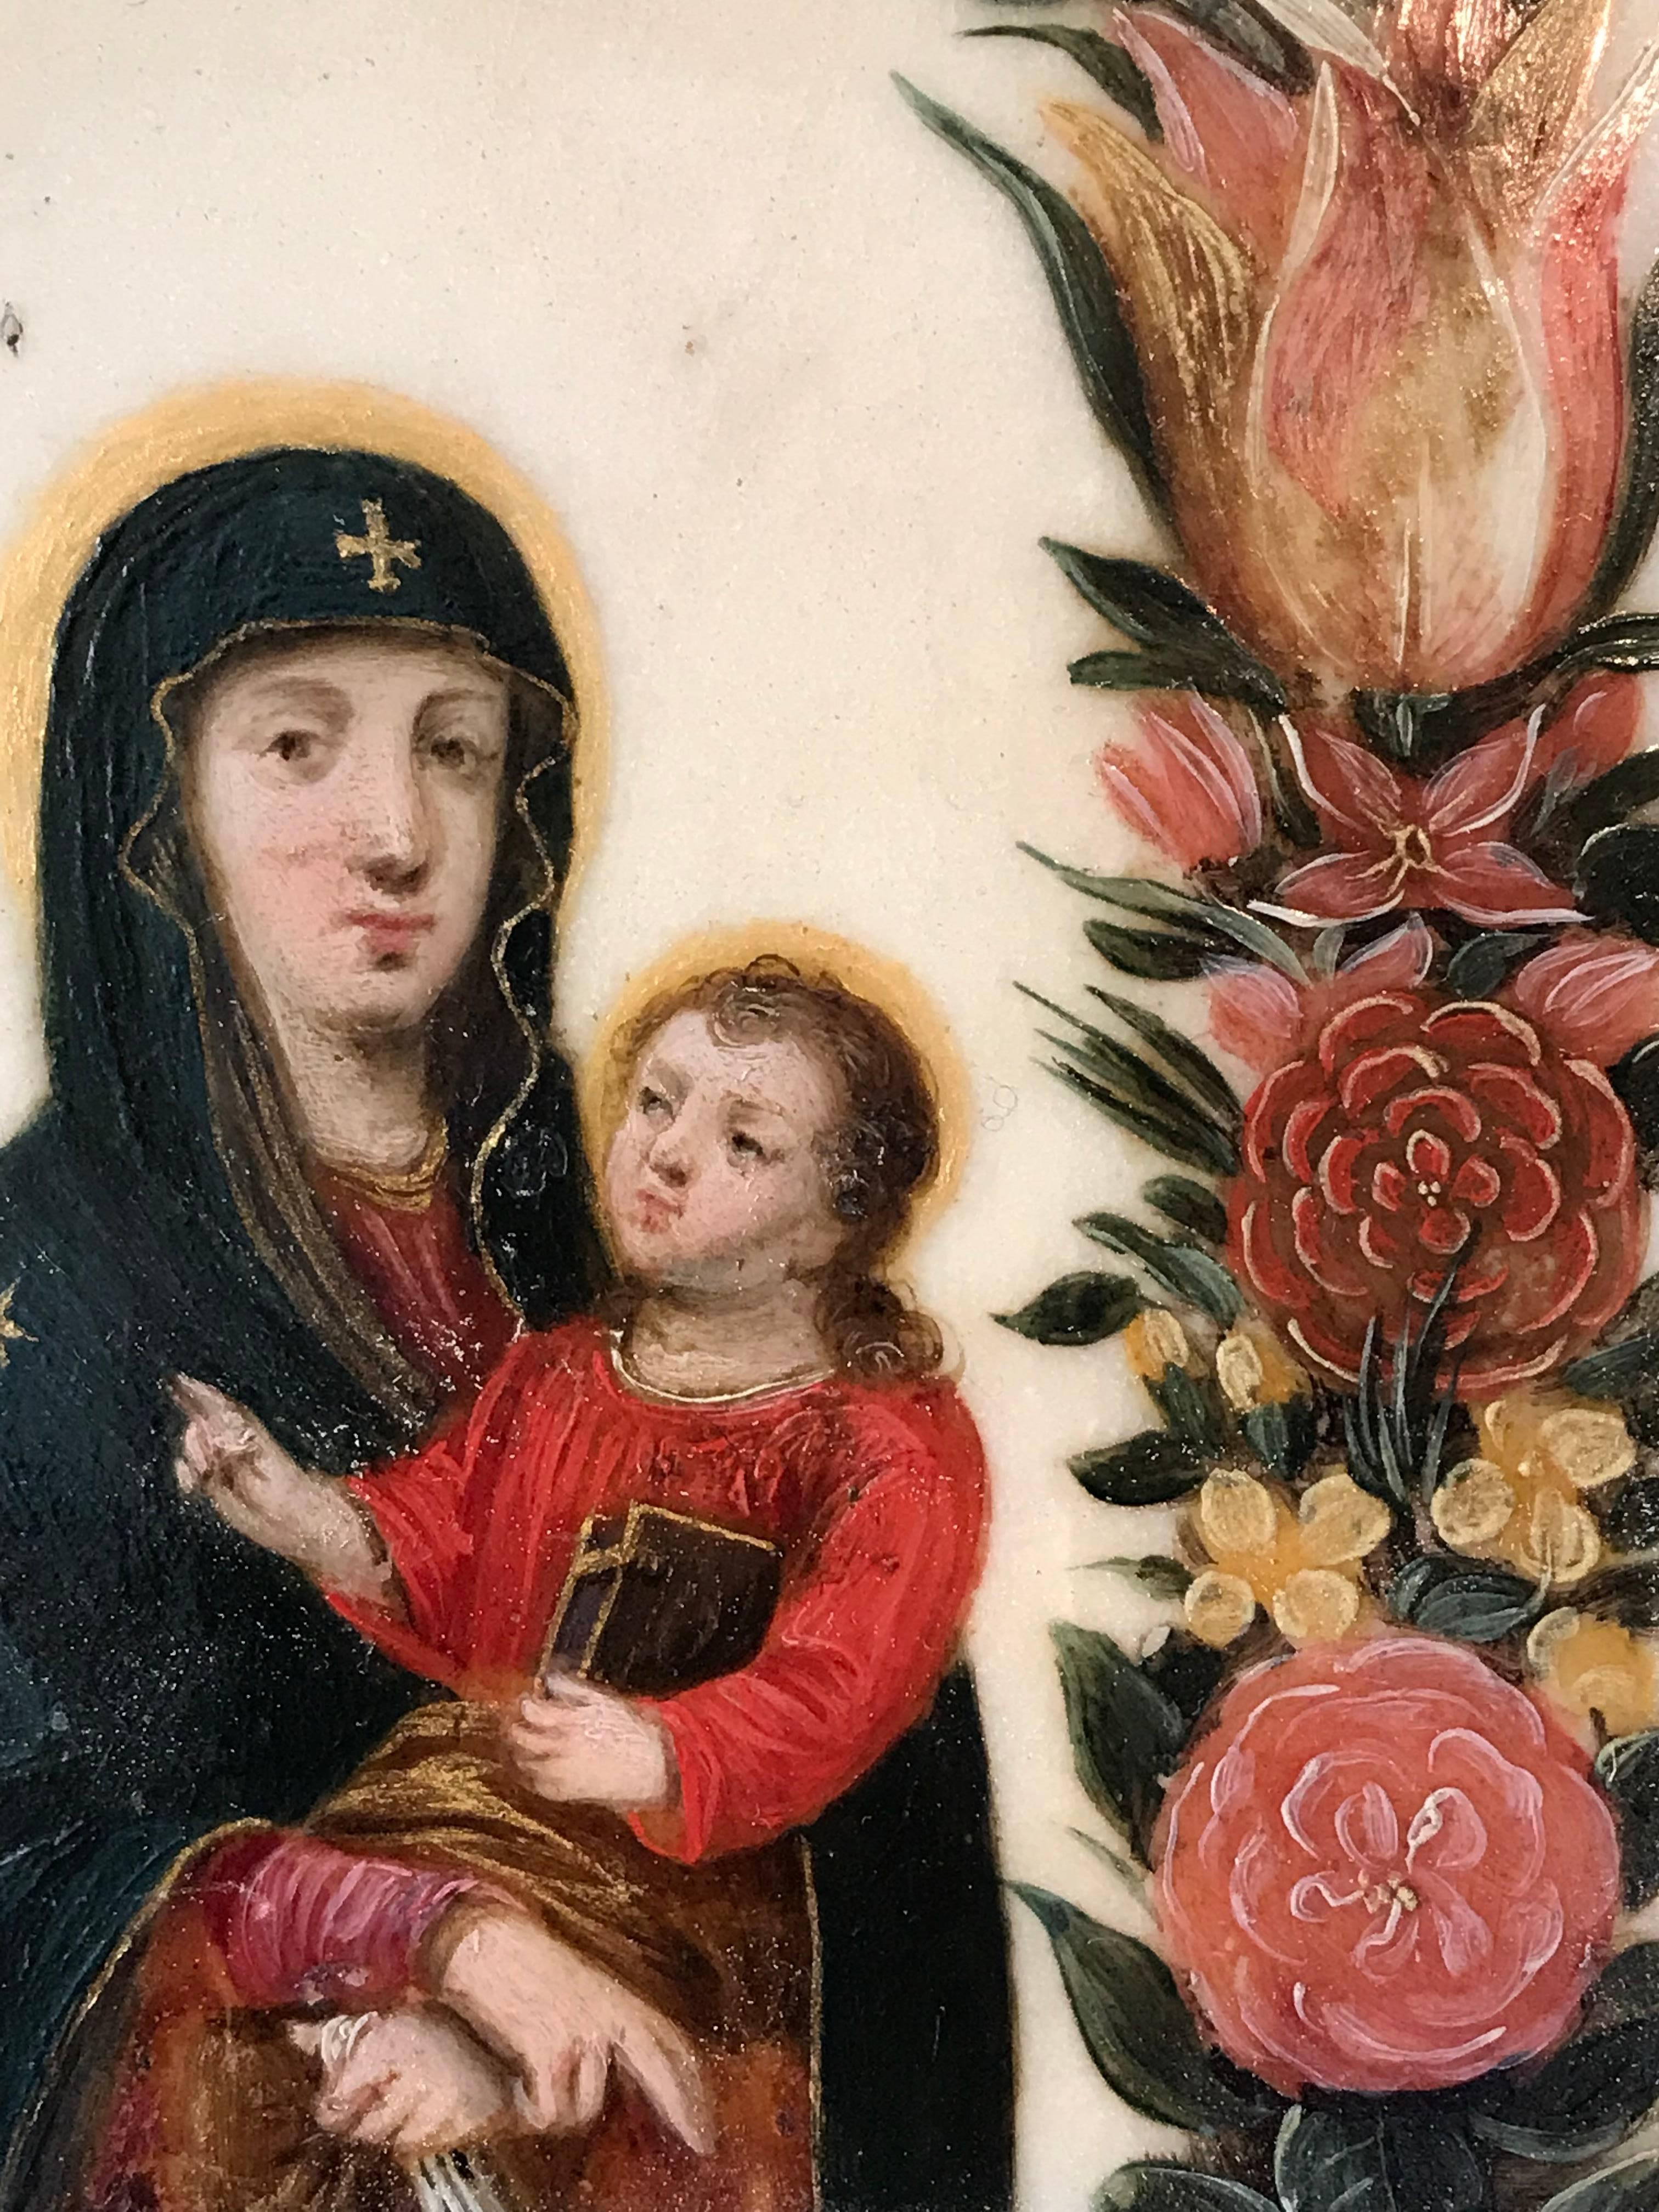 The Virgin and Christ Child
Flemish School, circa 1620's
oil painting on marble, framed
framed measurements: 8.5 x 7.25 inches

Very fine quality early 17th century Flemish Old Master oil painting. The work is painted on marble, which is